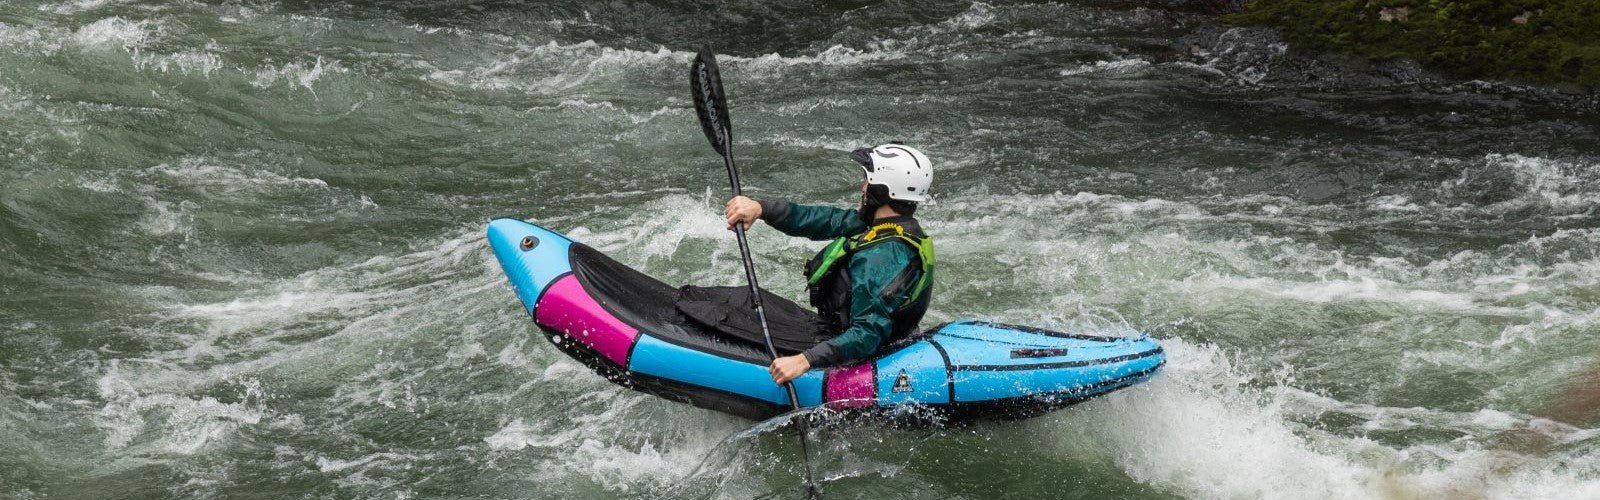 Wetsuits vs Drysuits Which is Better for Kayaking